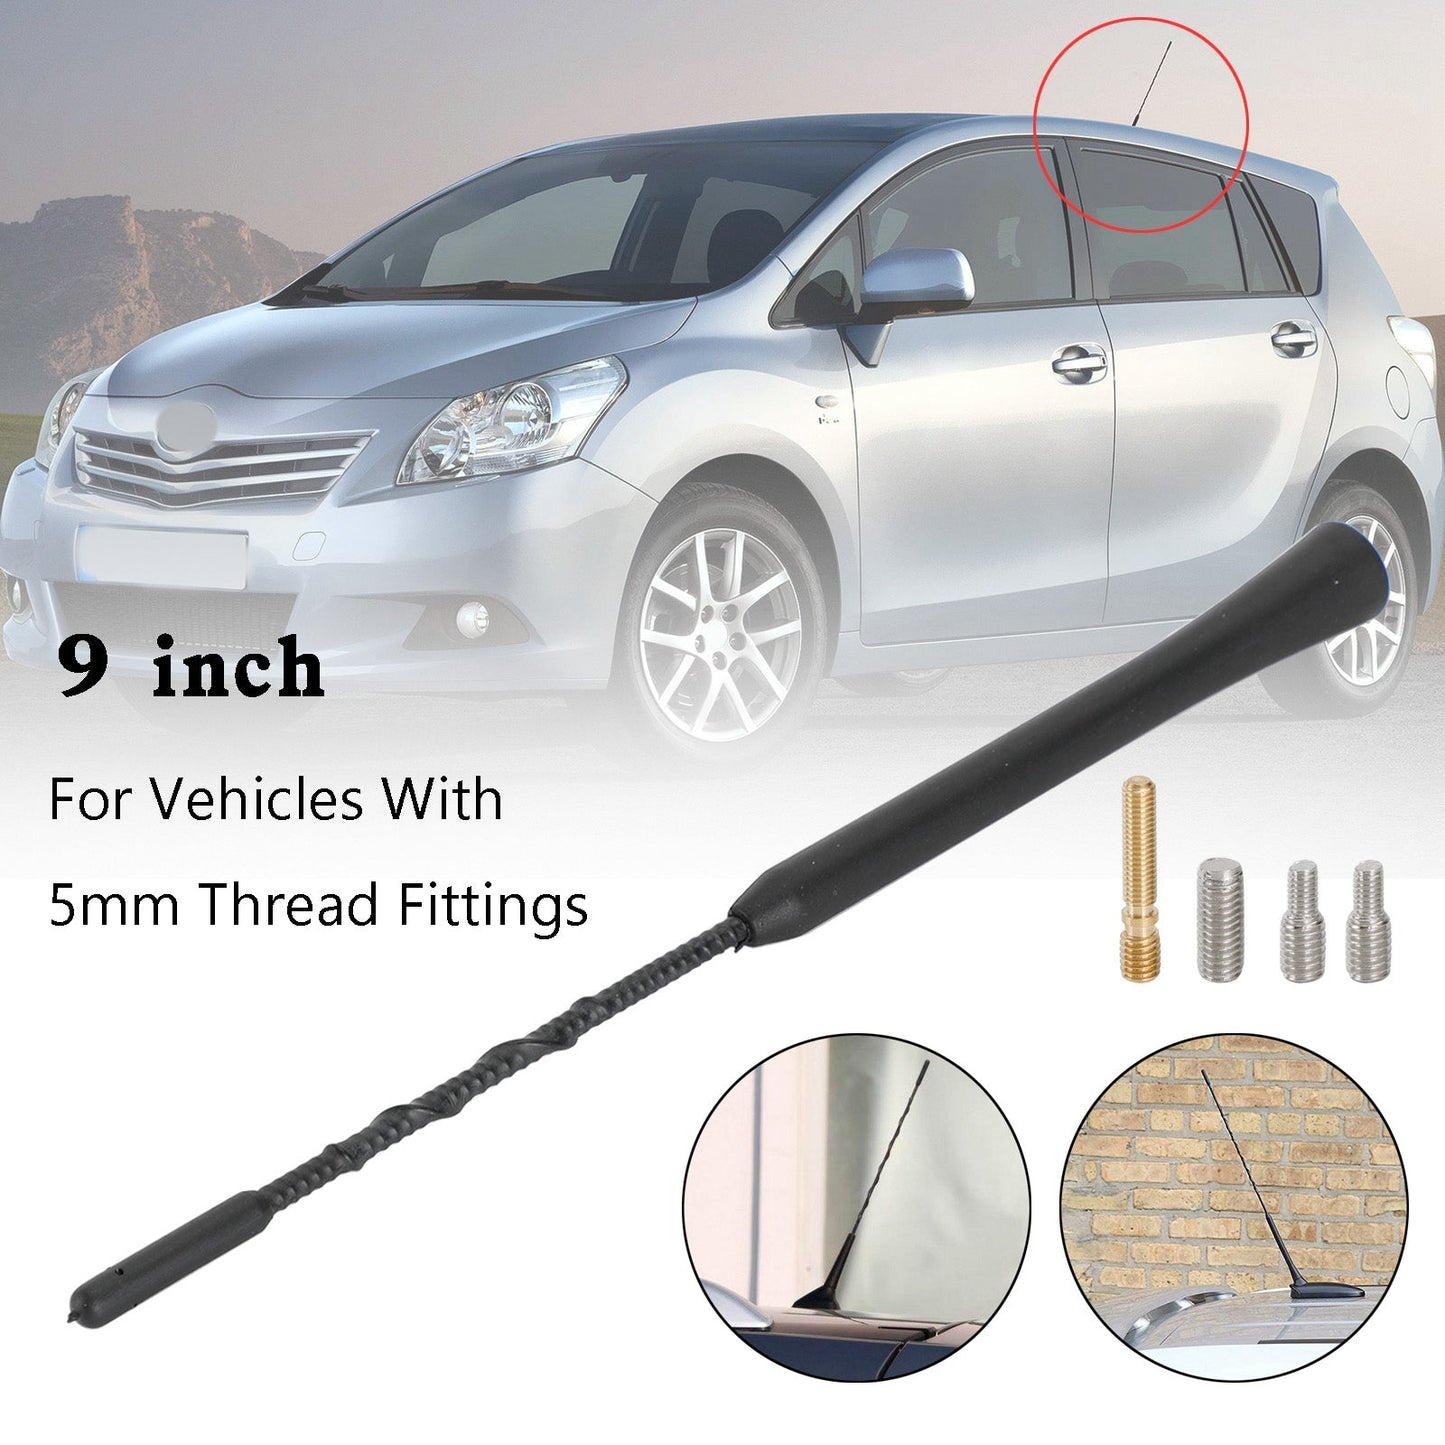 9" Universal Car Antenna Radio AM/FM Antena Roof Mast Long Whip style For Toyota